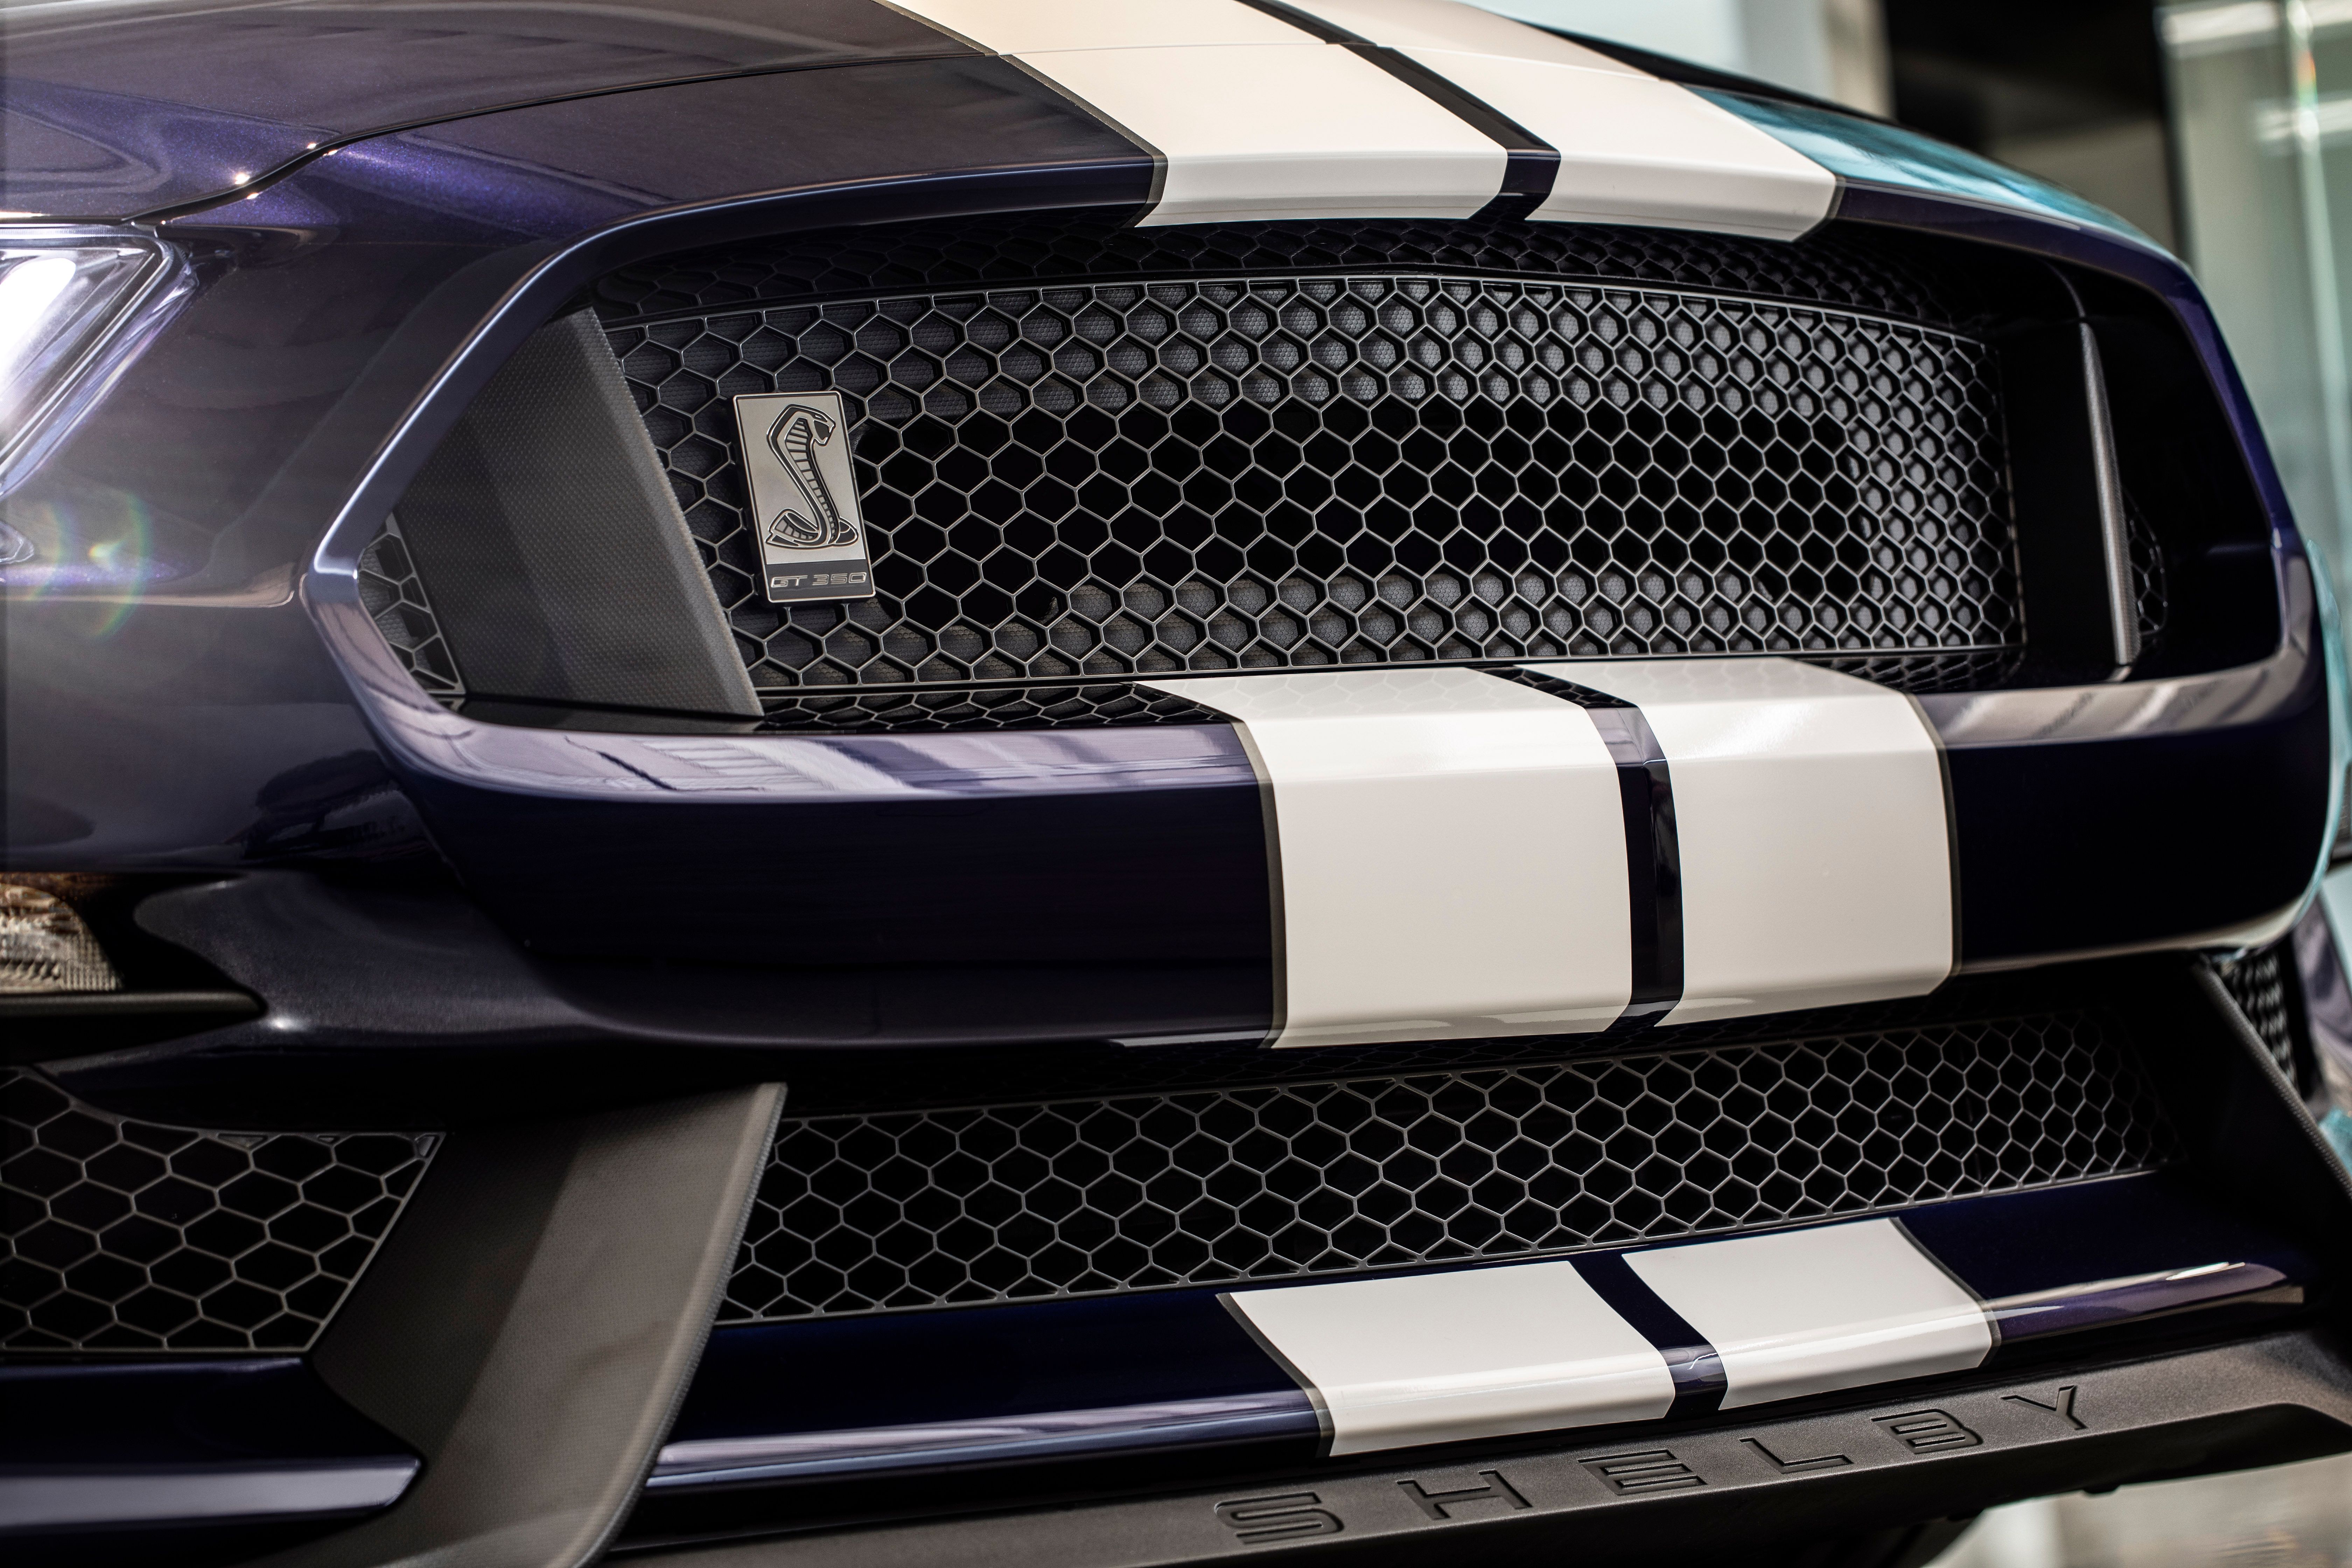 The grille of the Shelby GT350.